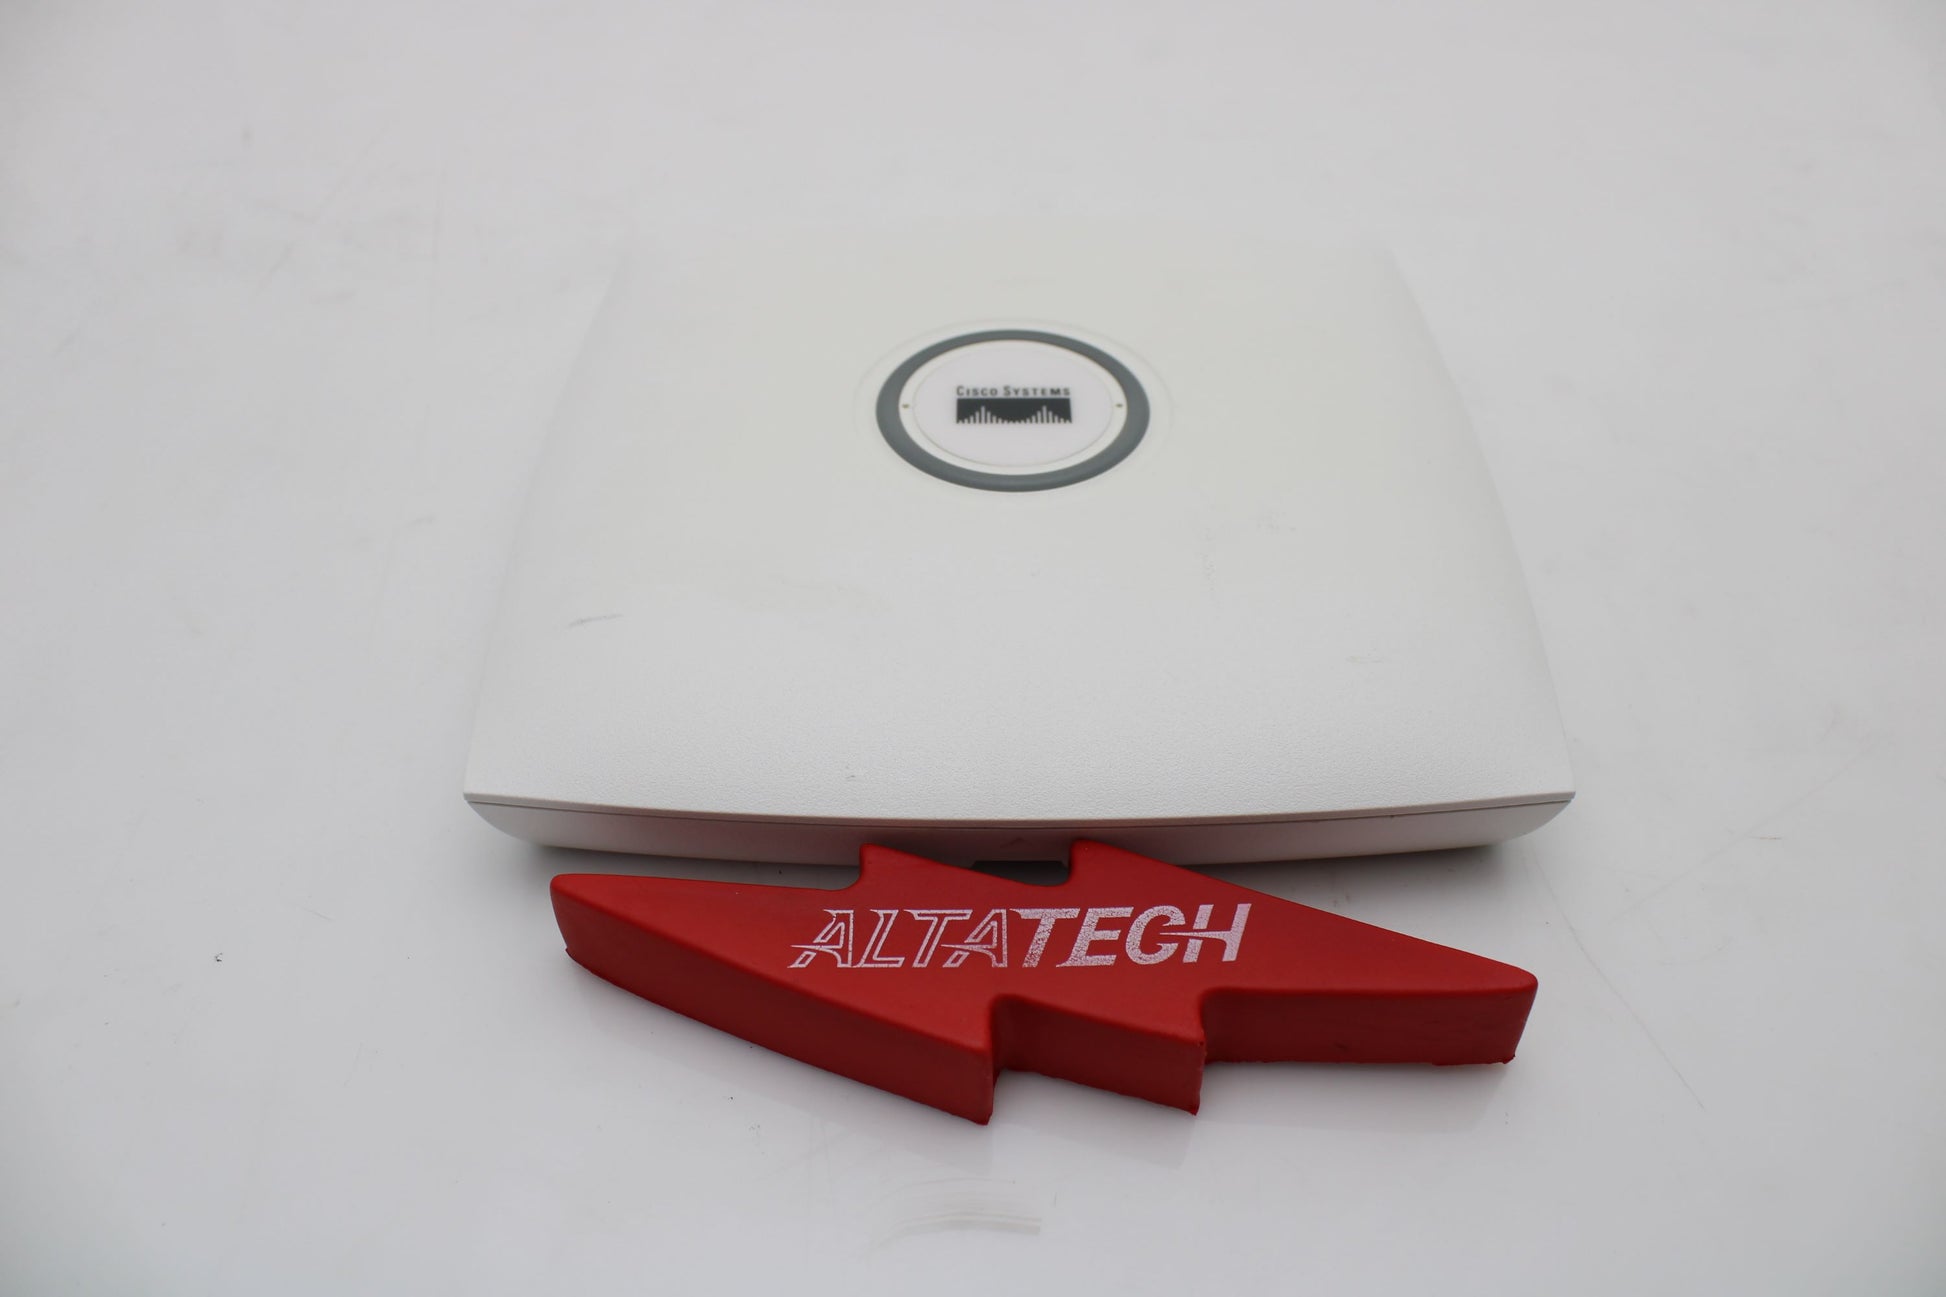 Cisco AIR-LAP1131AG-A-K9 AIR-LAP1131AG-A-K9 Cisco Aironet 1131AG Wireless Access Point, Used